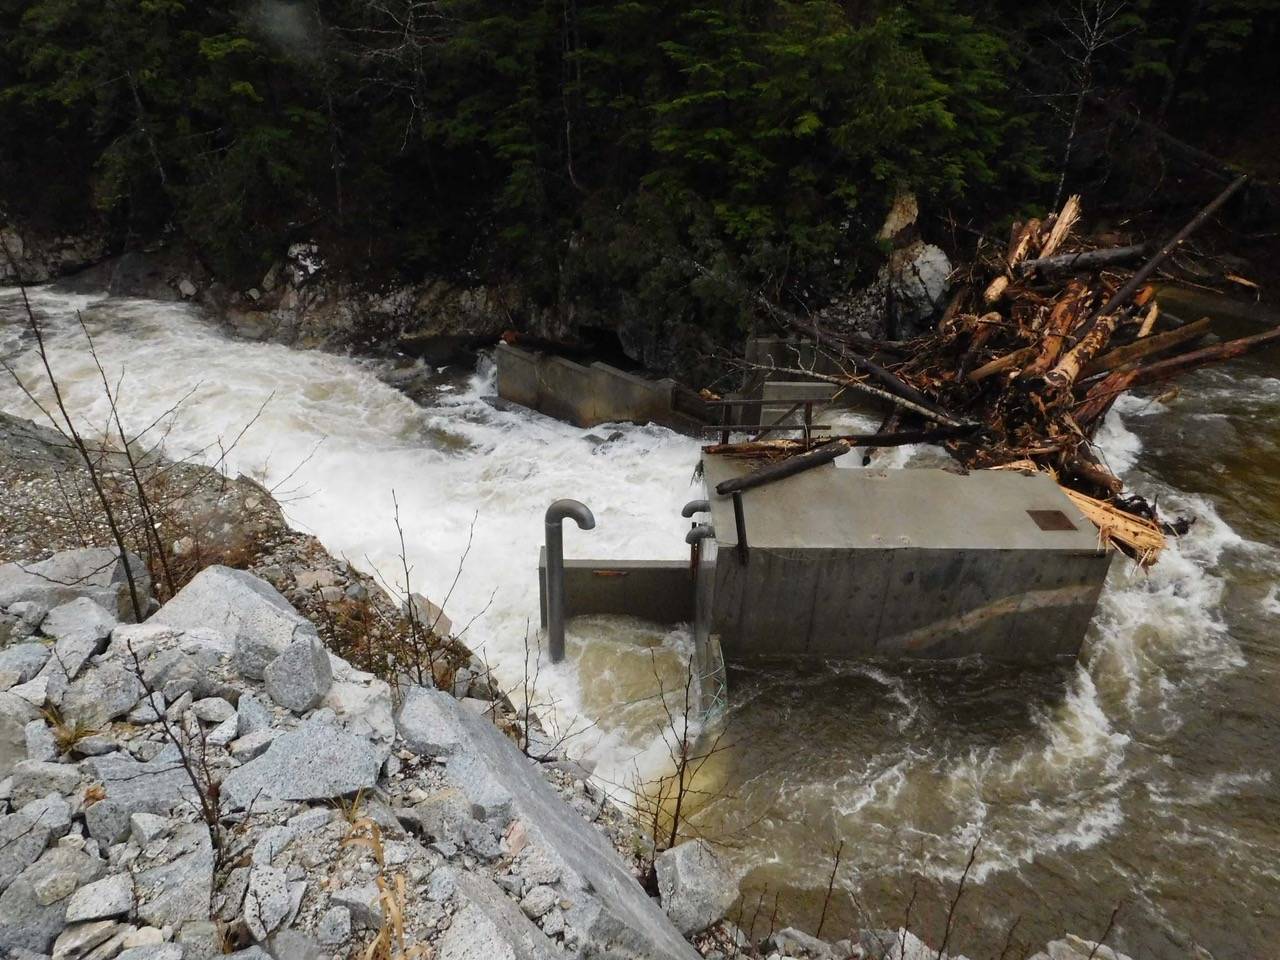 Courtesy photo / Art Bloom 
Debris blocking the hydropower site on the Indian River in Tenakee Springs is clearly visible. Without removing the debris, the salmon run could be affected.